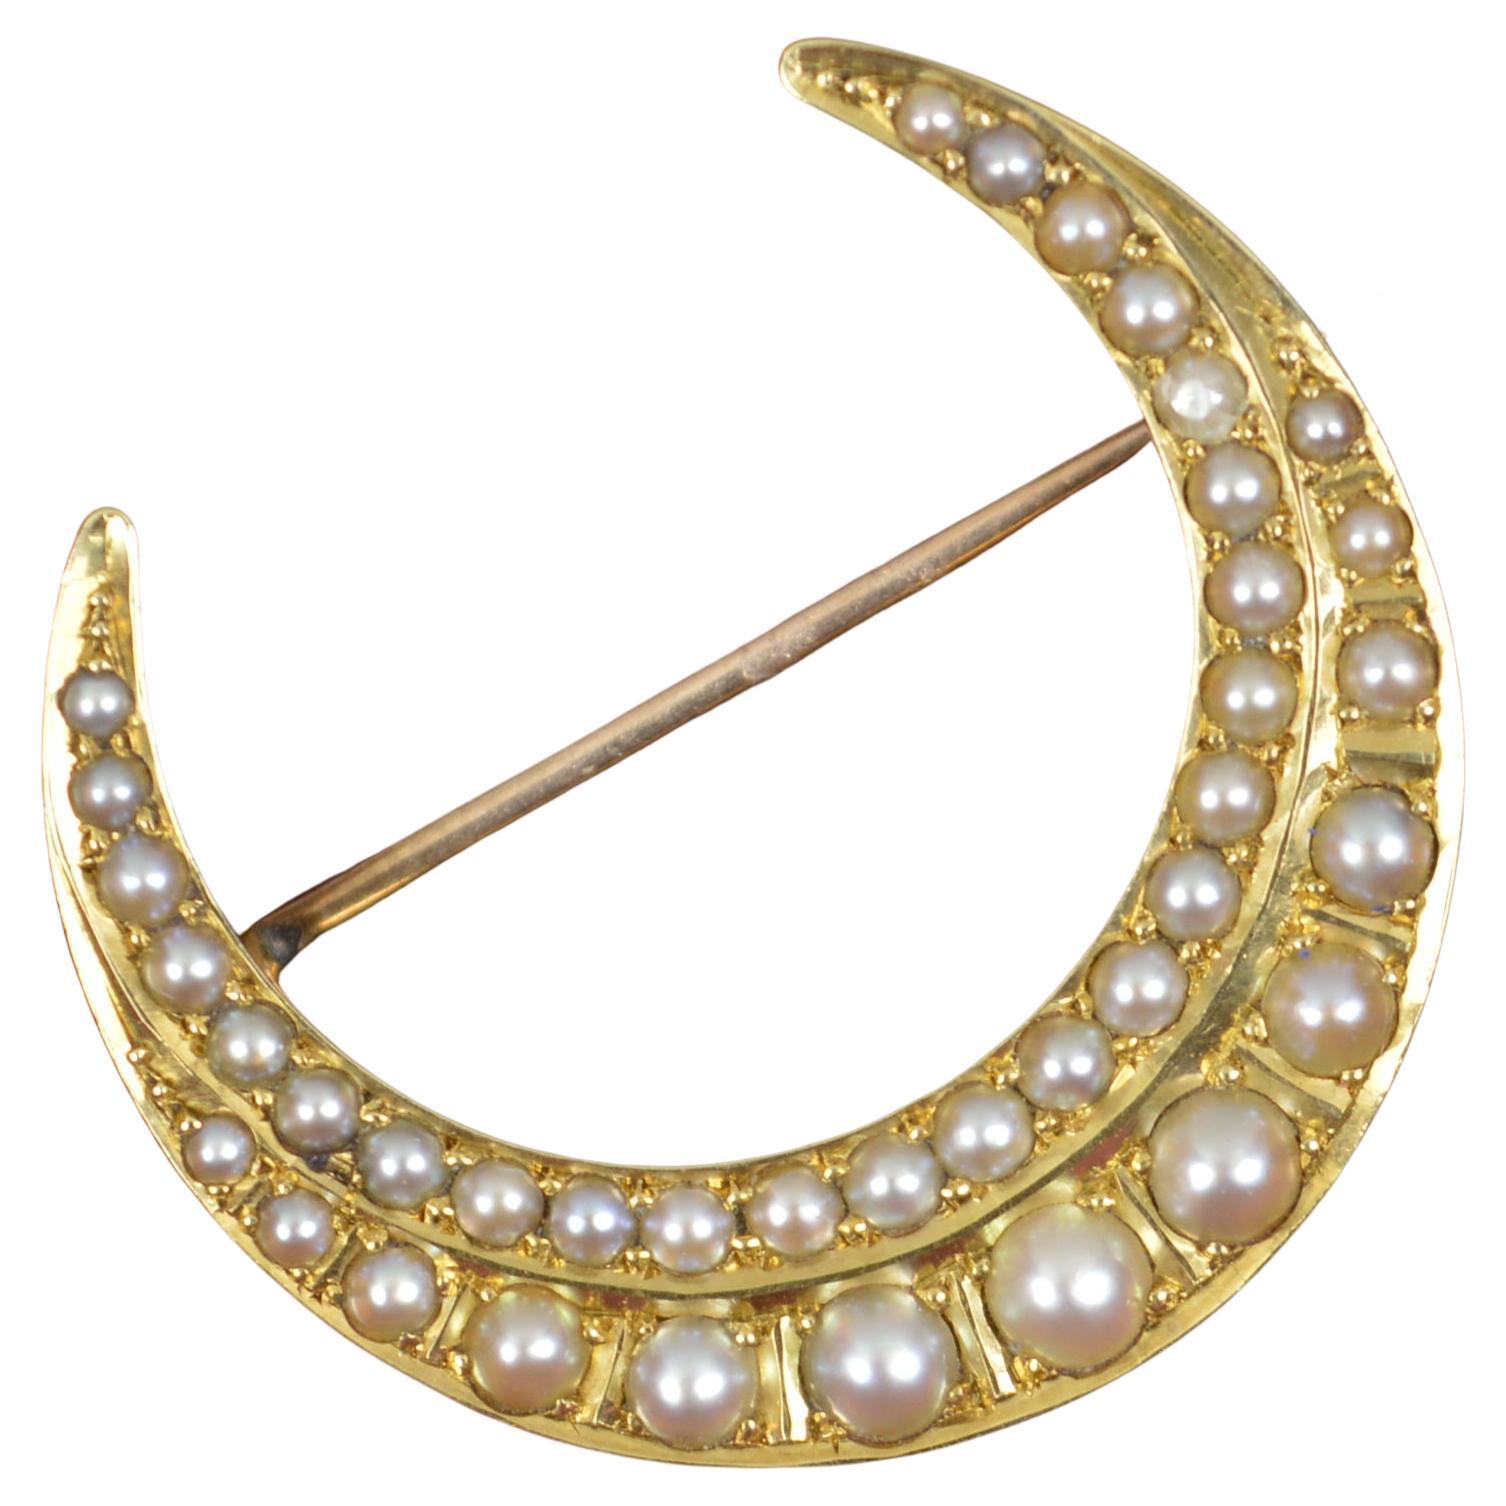 Victorian 15 Carat Gold and Double Pearl Crescent Brooch